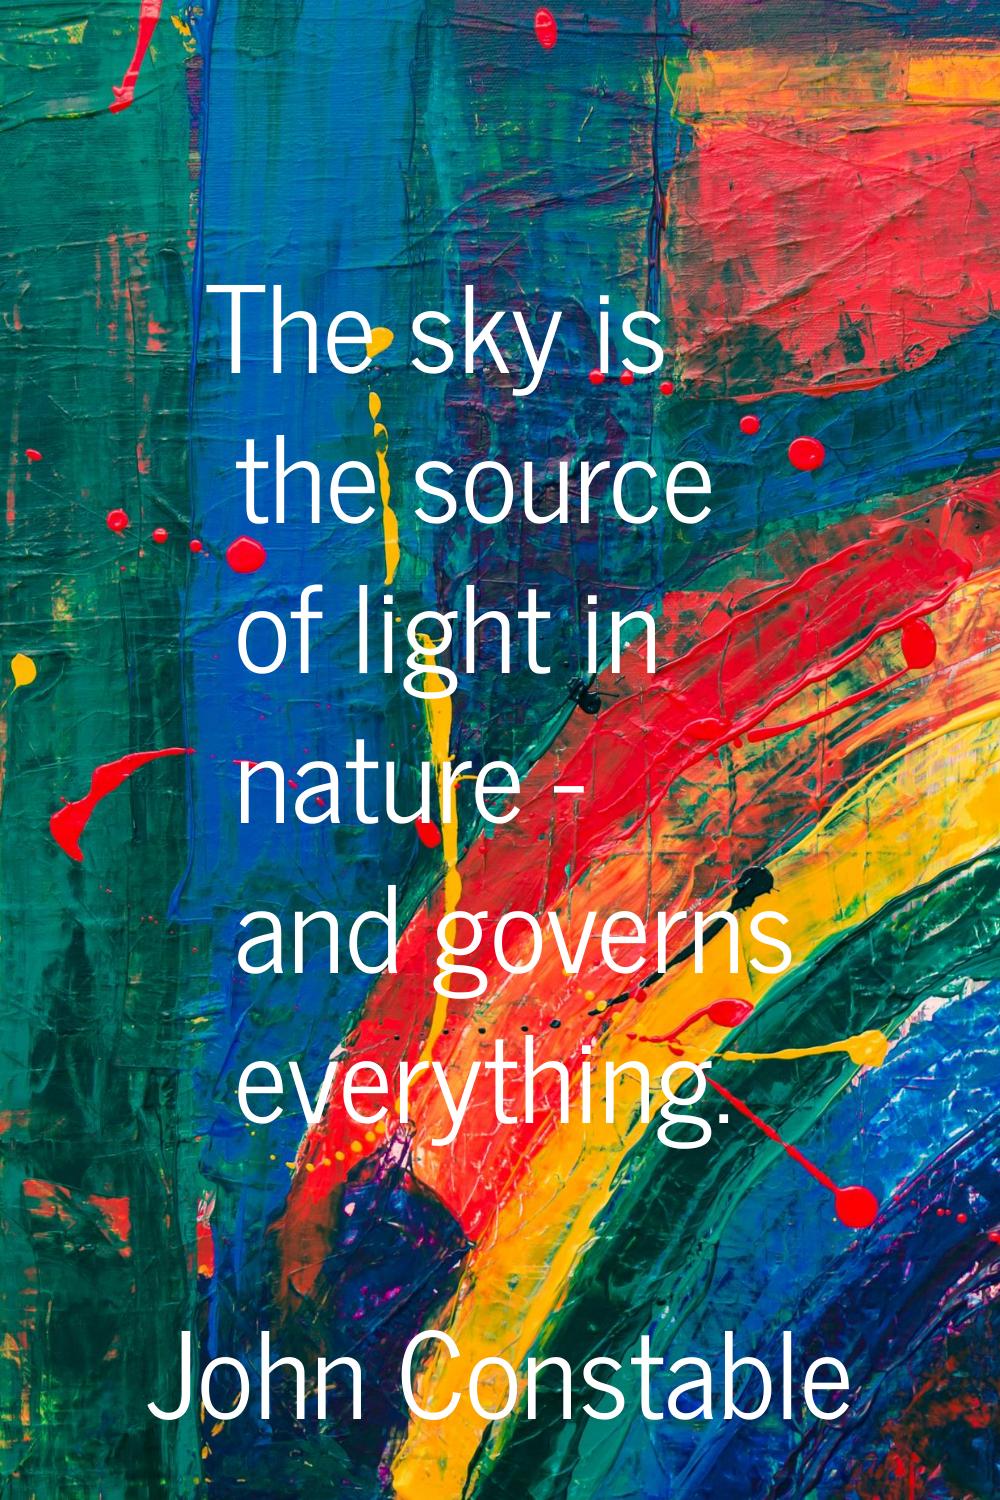 The sky is the source of light in nature - and governs everything.